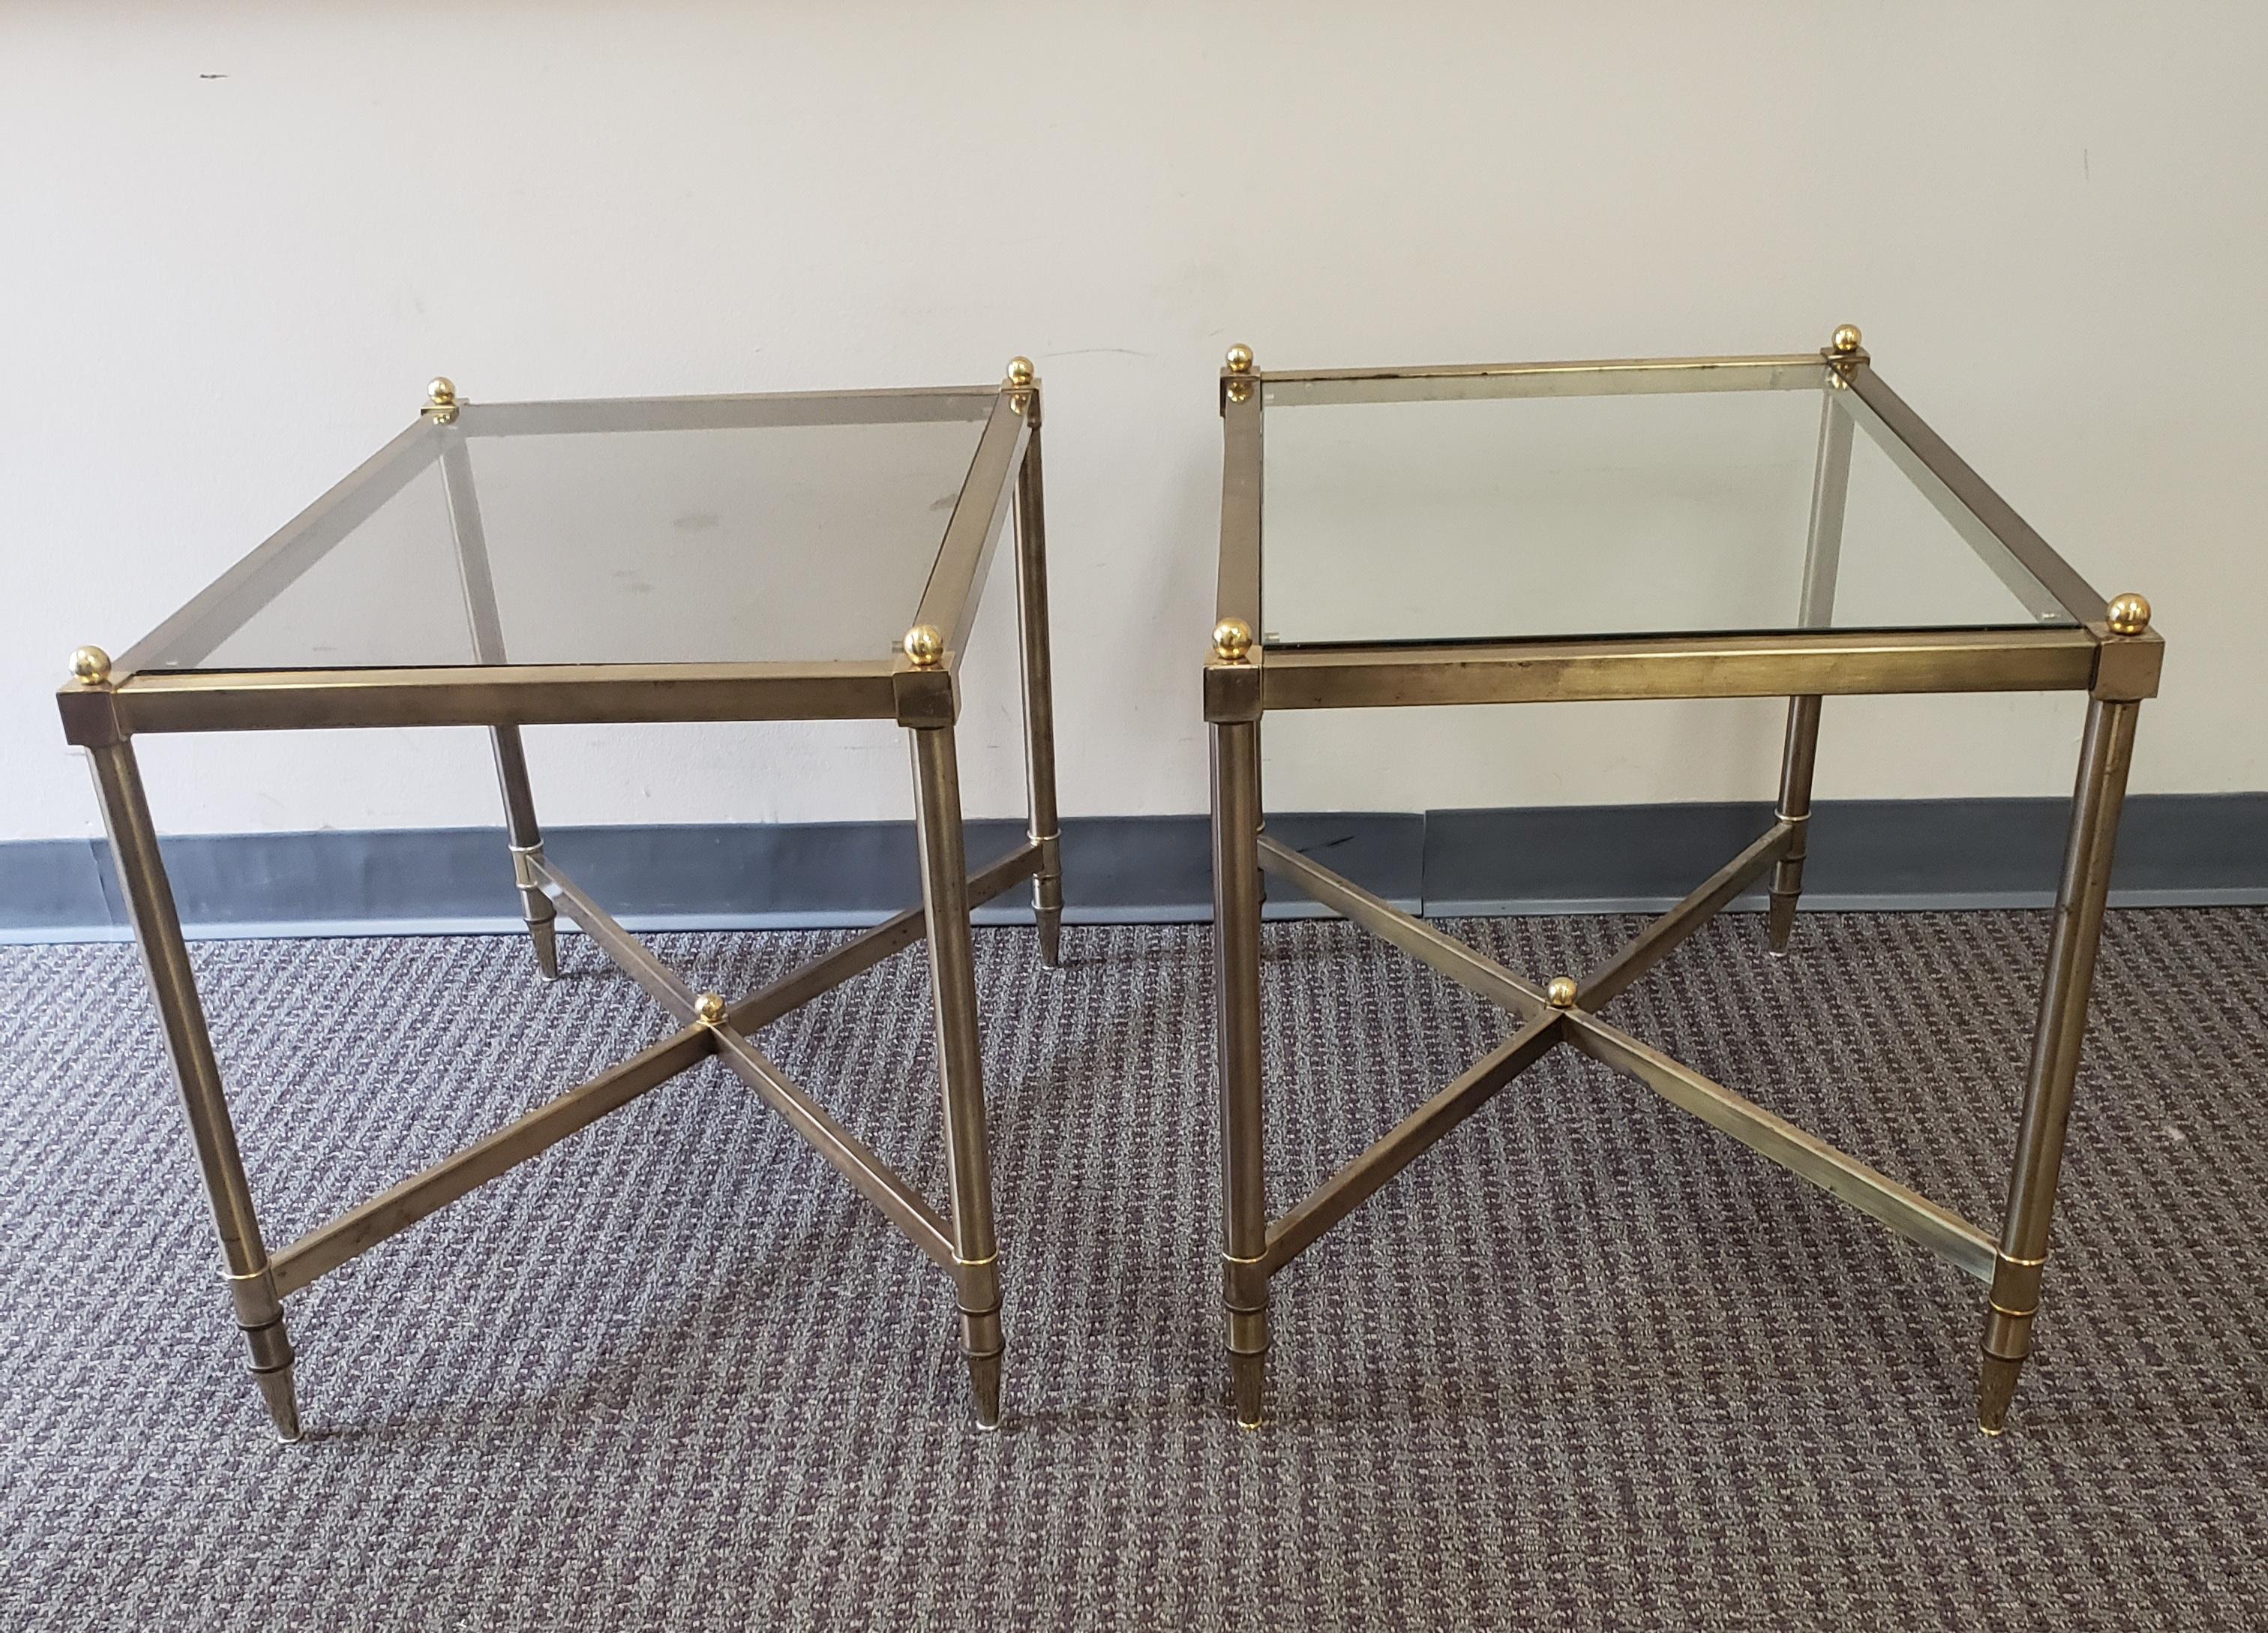 Maison Jansen Style Rectangular Brass and Glass Top Stretcher Base Side Tables. 
Measures 19.25